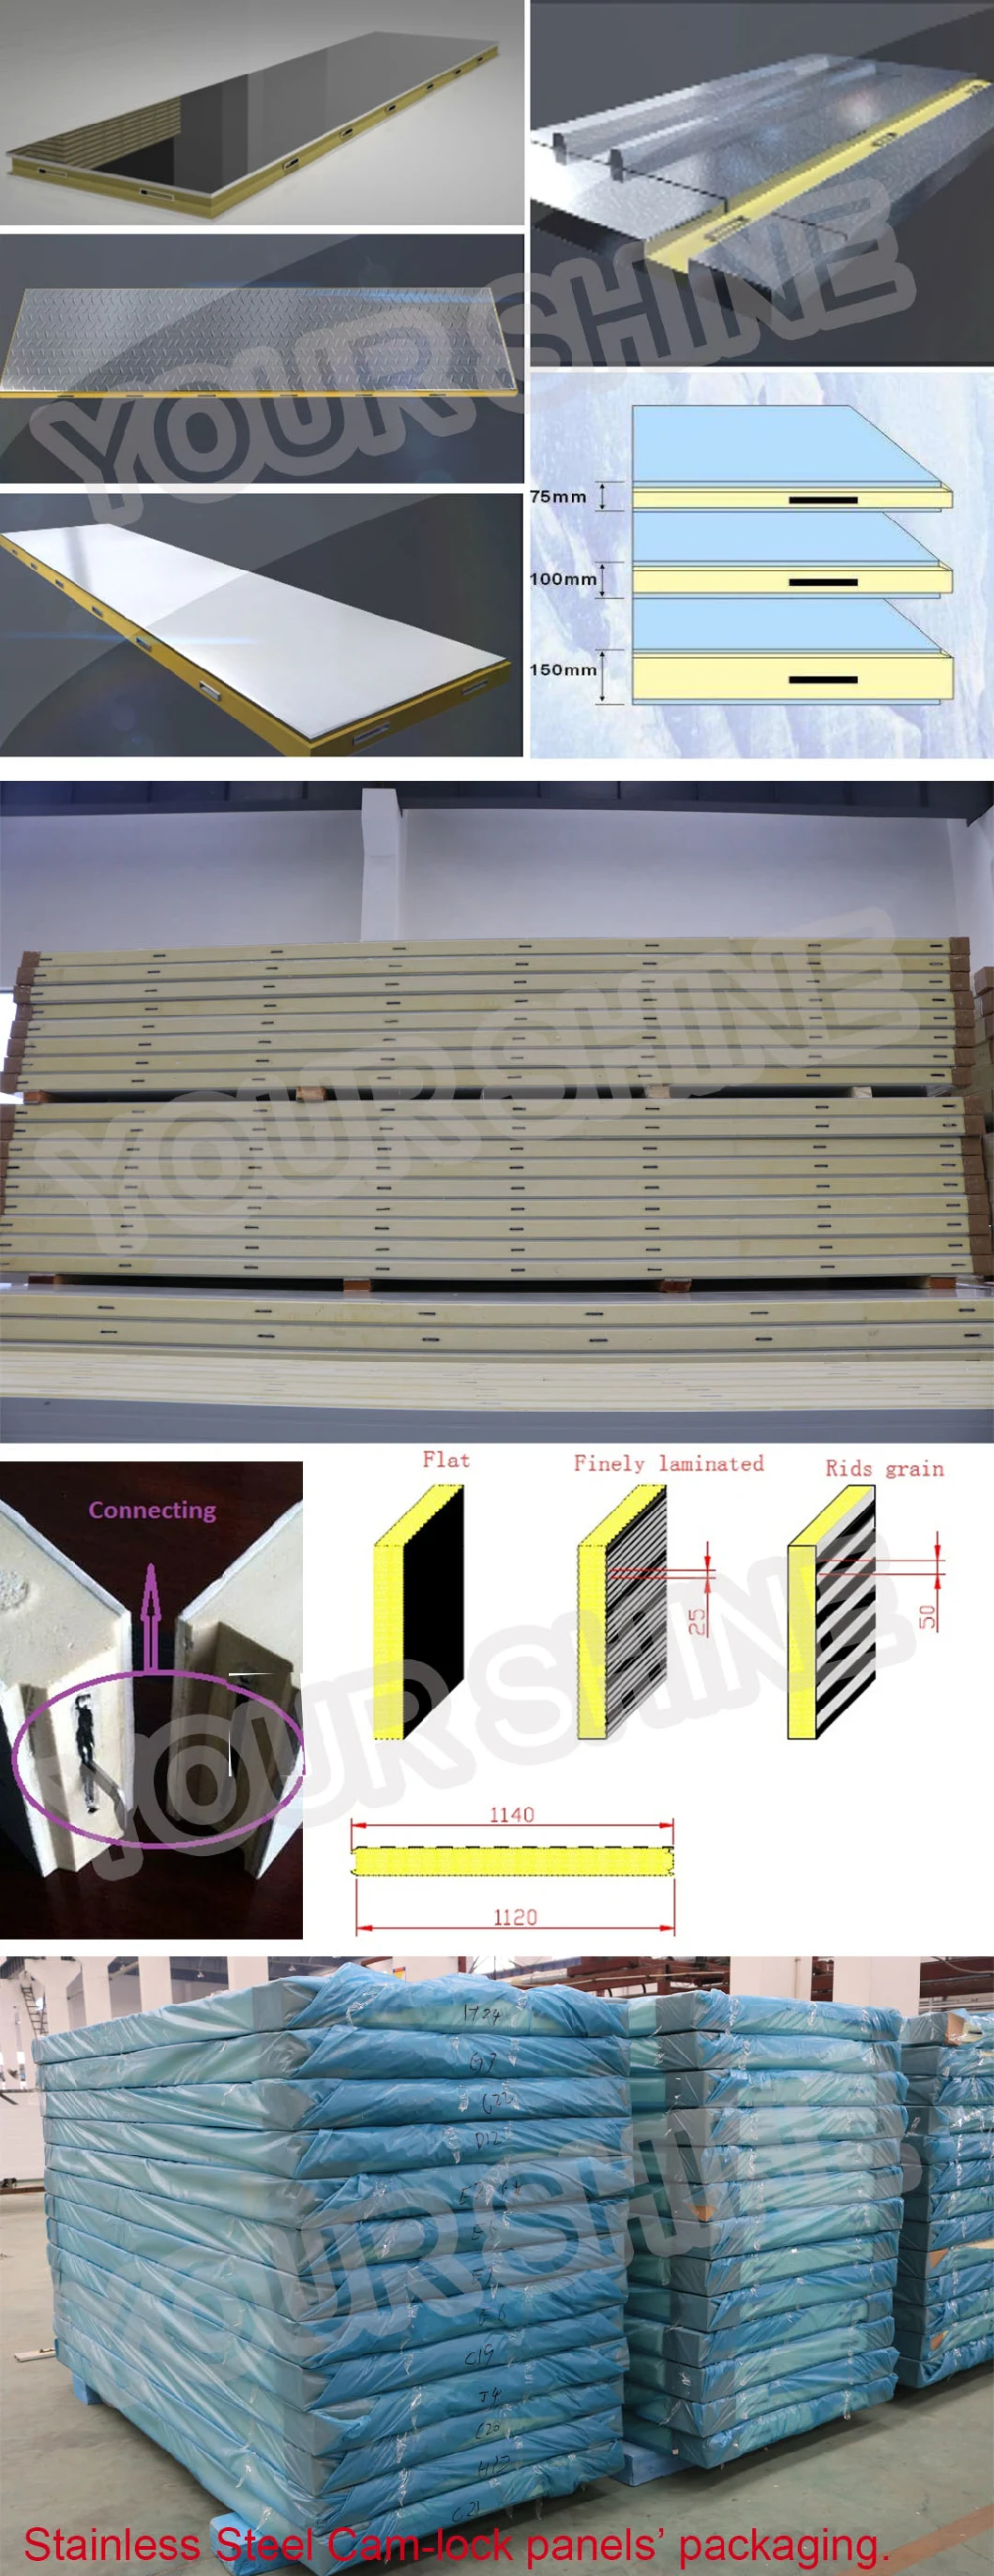 Insulated Roof Panel Building Roof Cladding 150mm EPS/PU Sandwich Panel